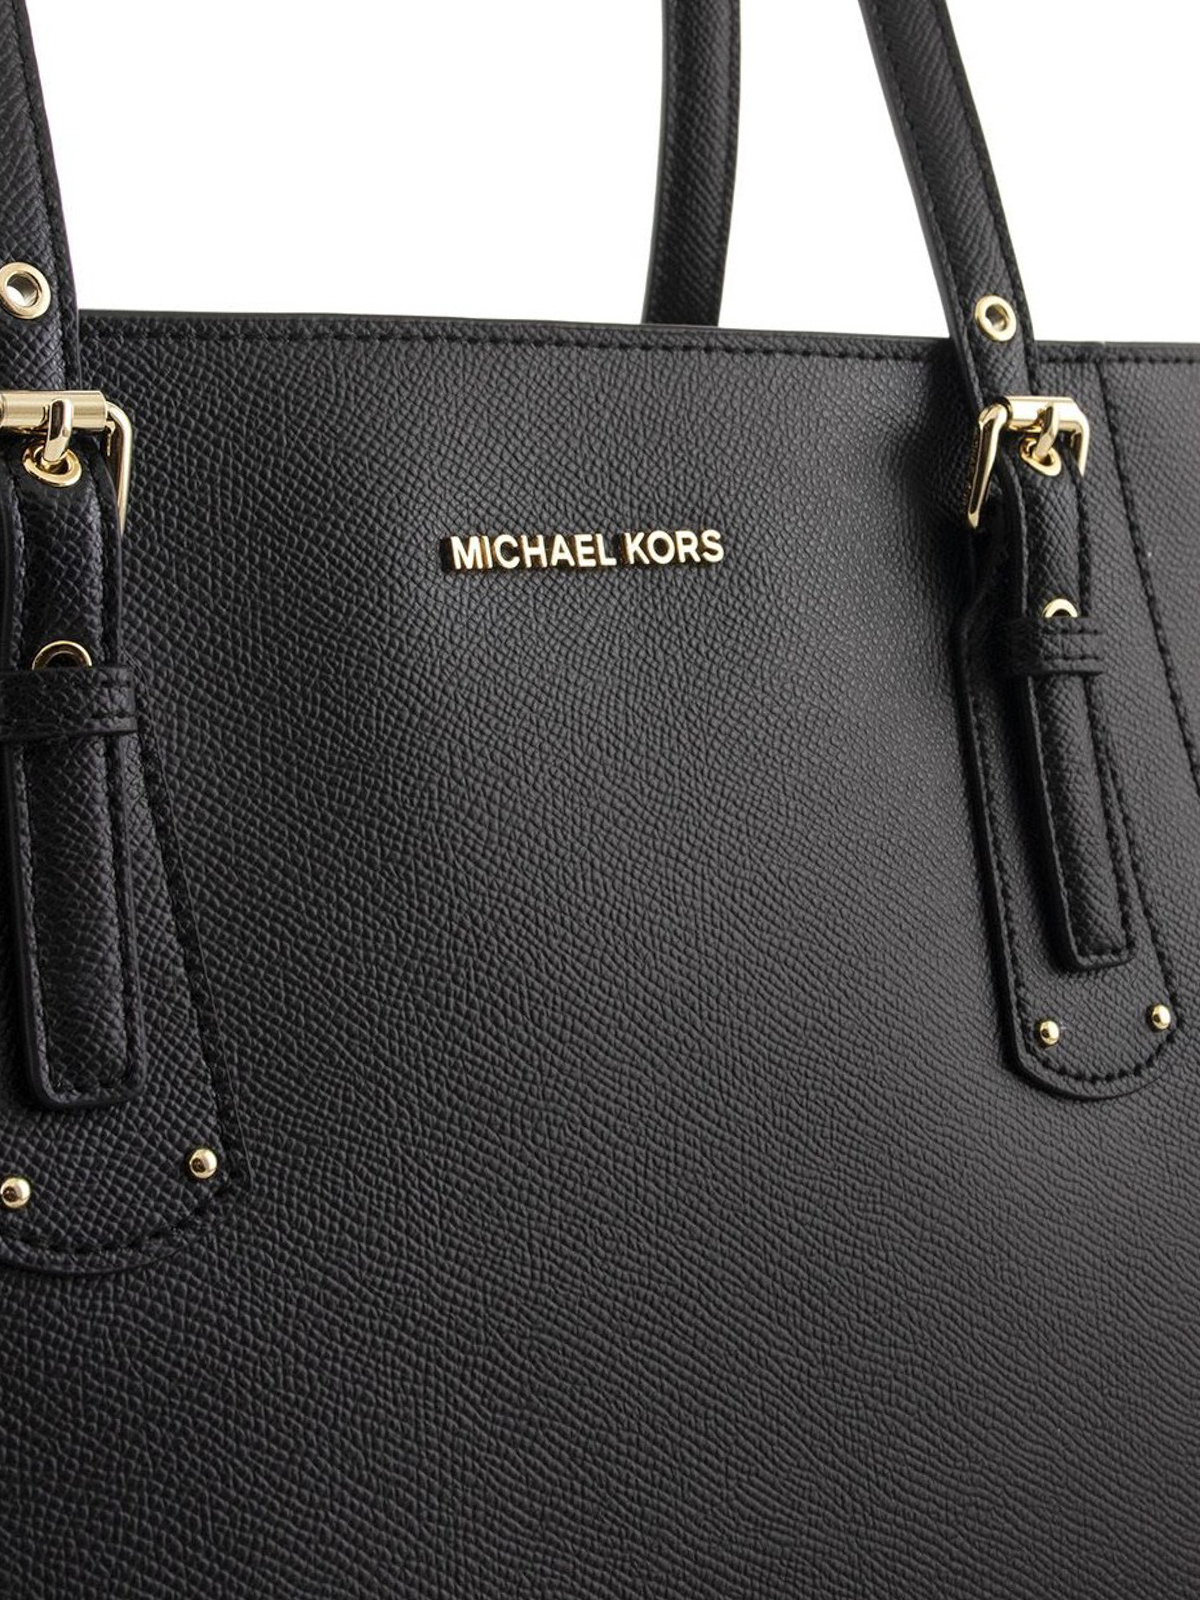 Totes bags Michael Kors - Voyager S black grainy leather bag ...